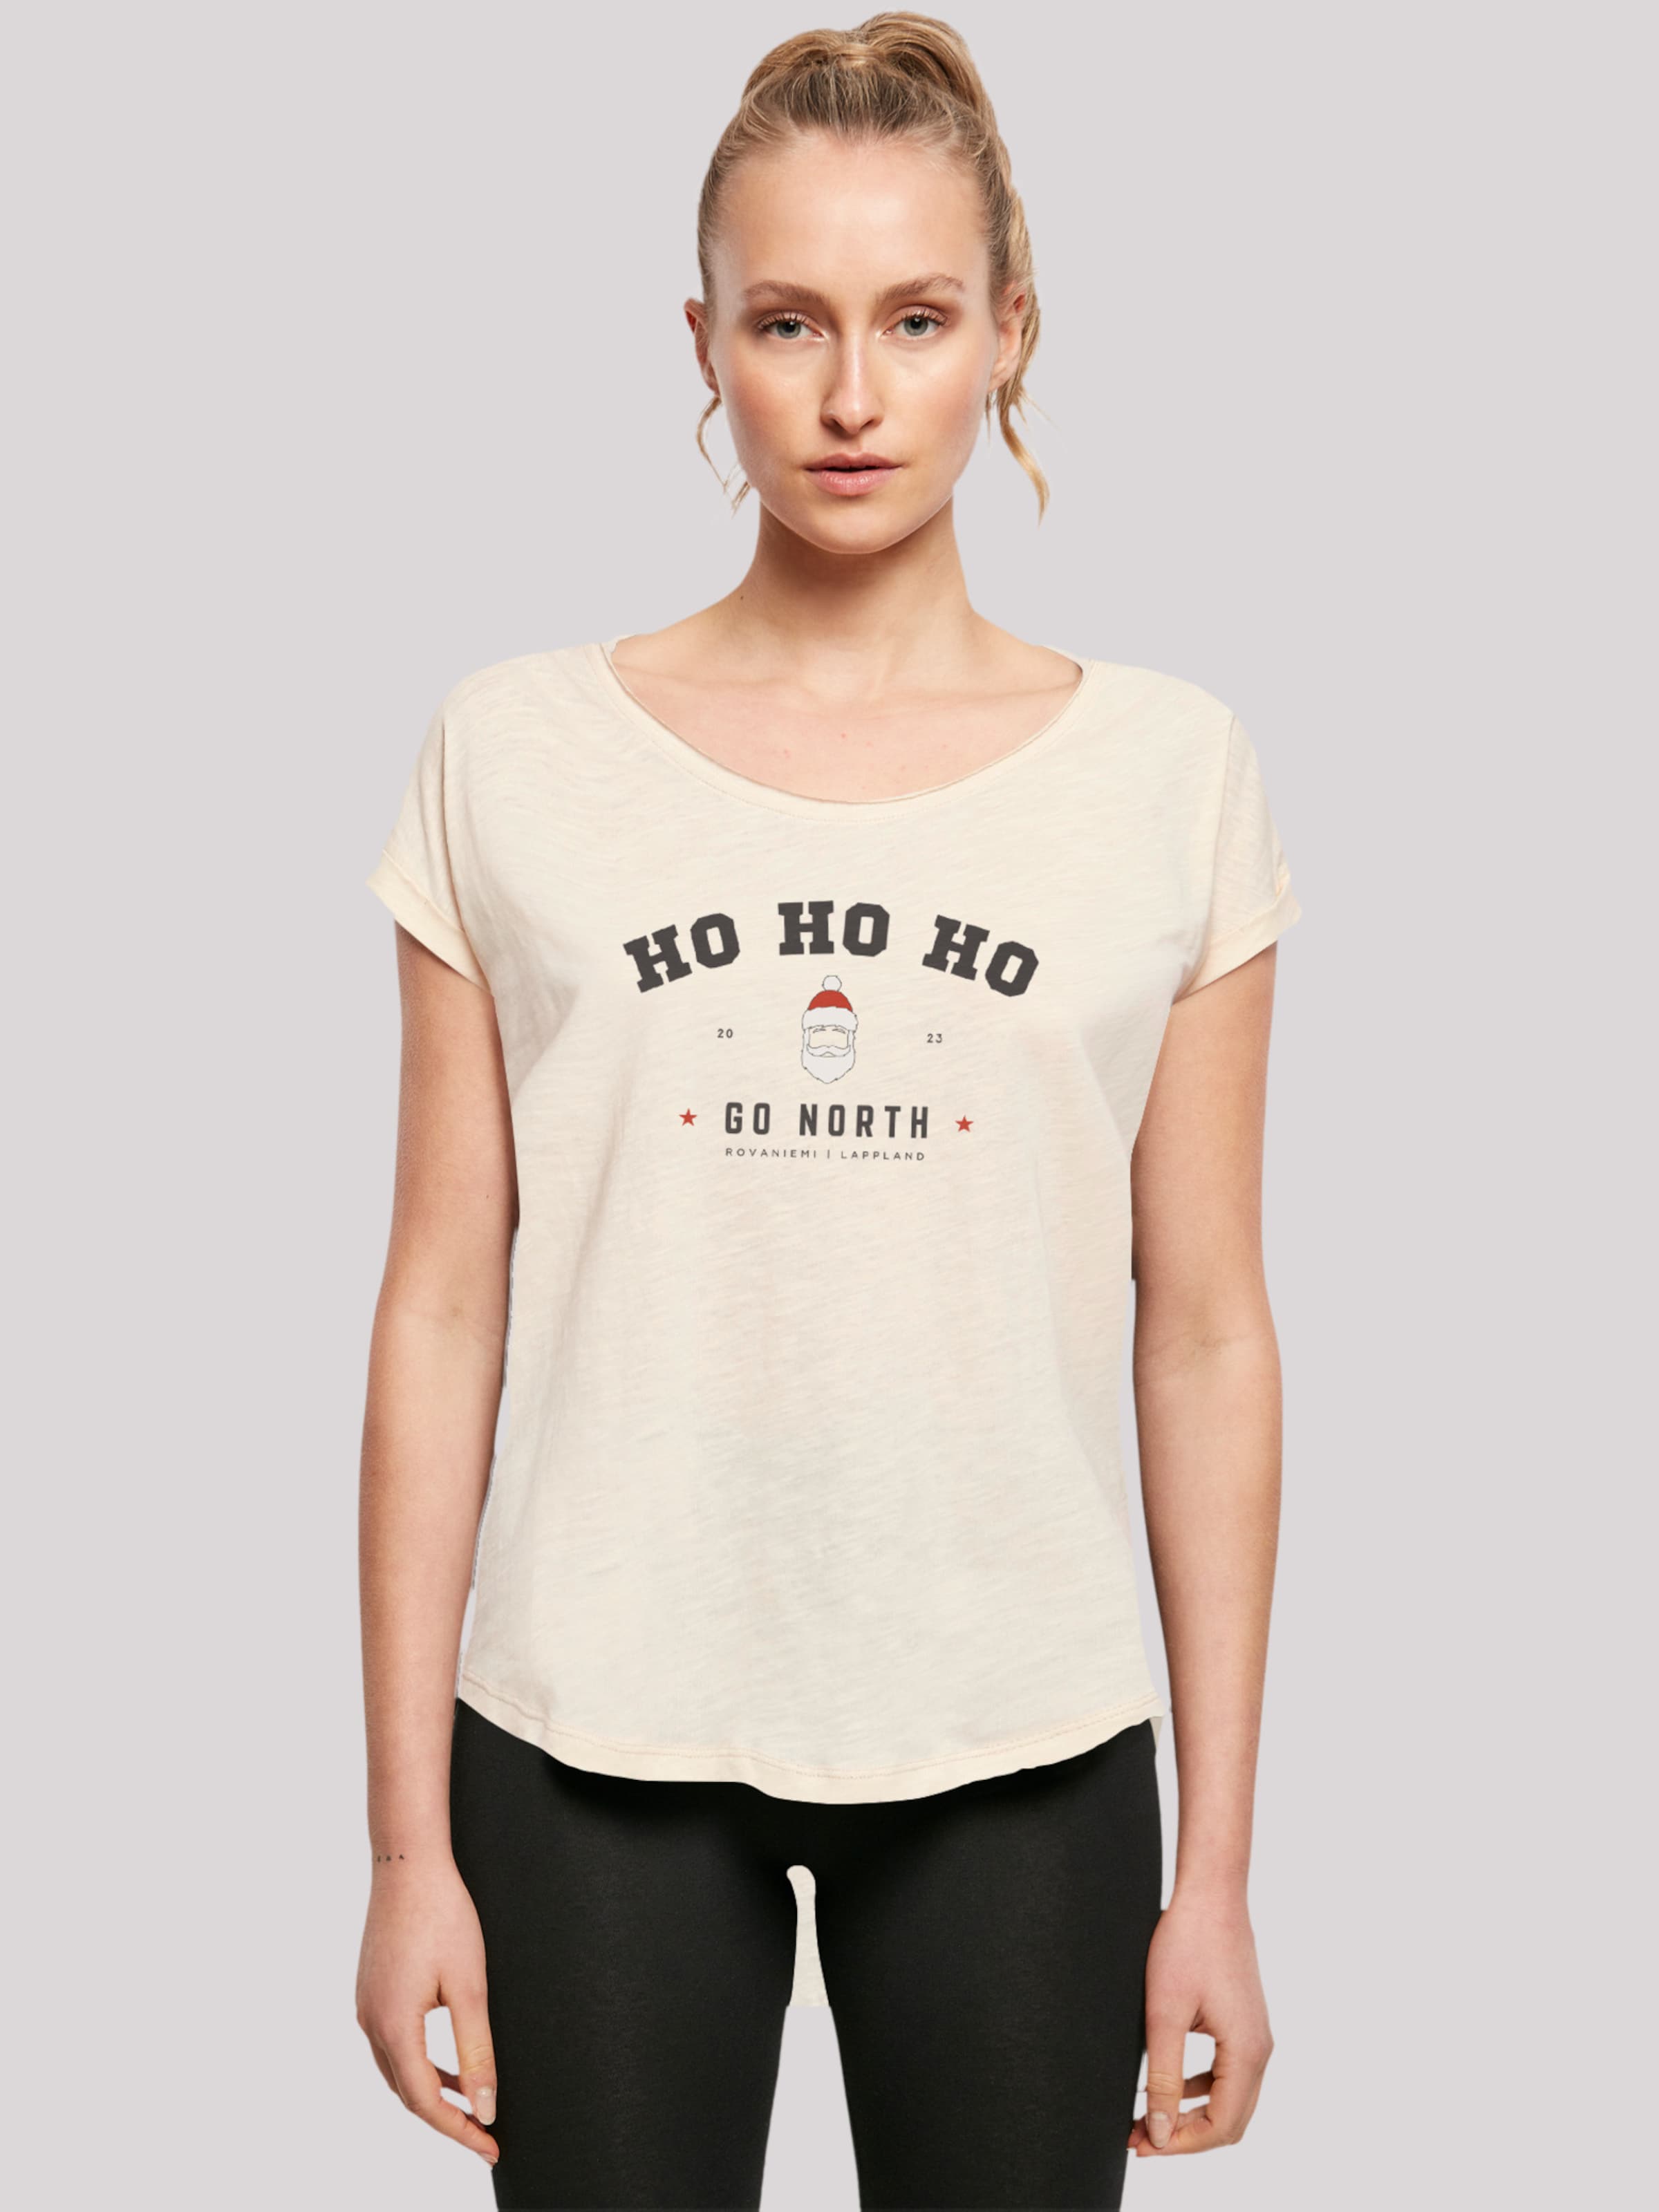 F4NT4STIC Shirt ABOUT Ho | \'Ho Weihnachten\' Beige Ho Santa in Claus YOU